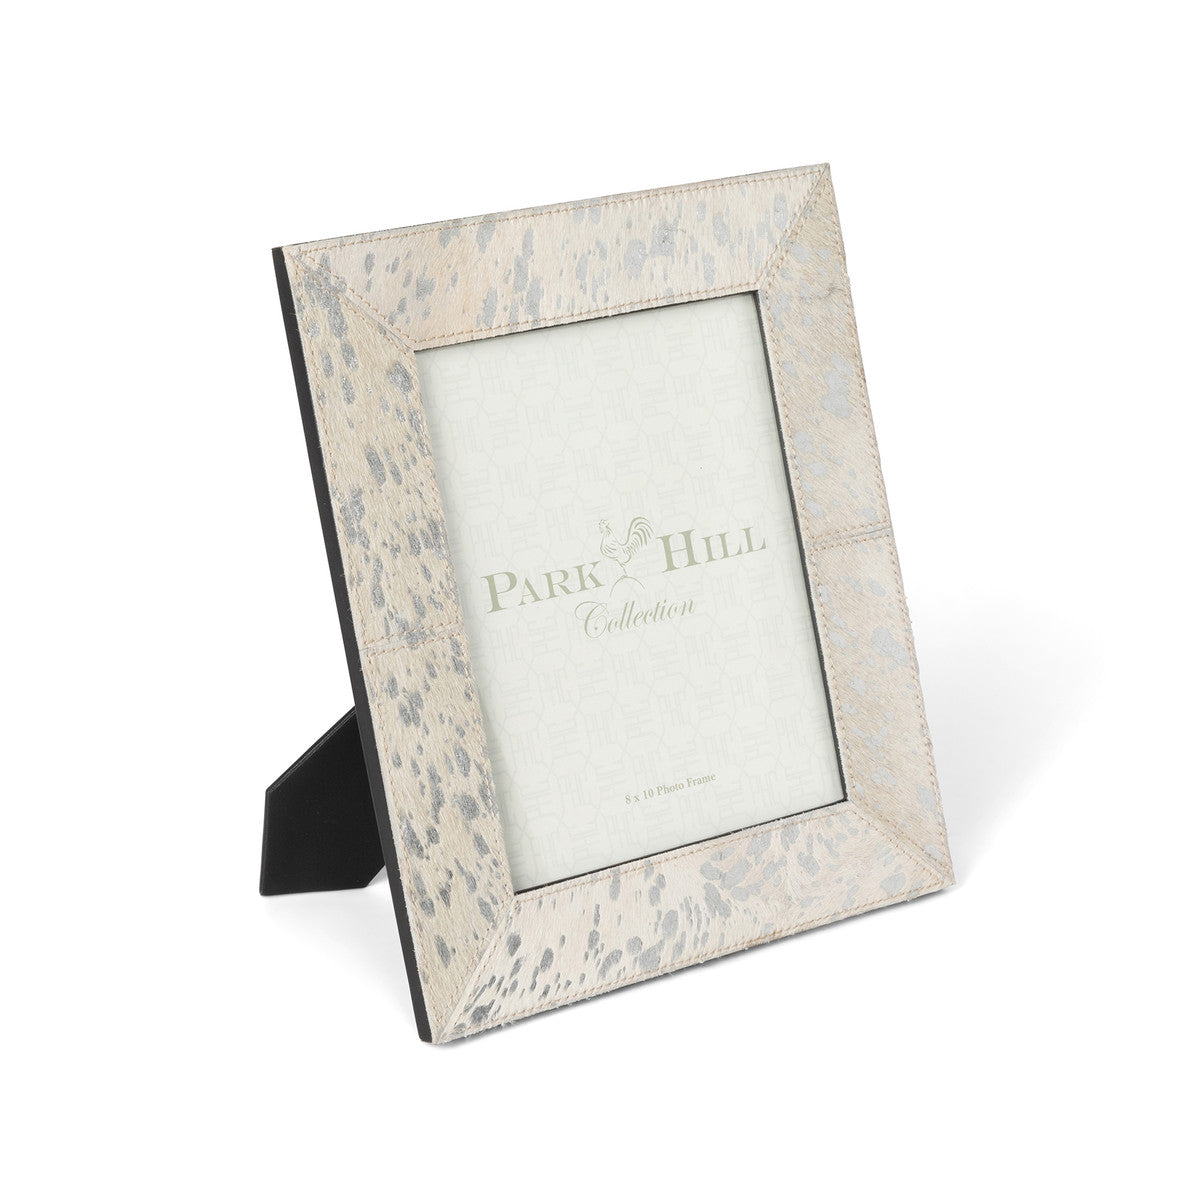 Paint Spattered Hide Photo Frame - Large